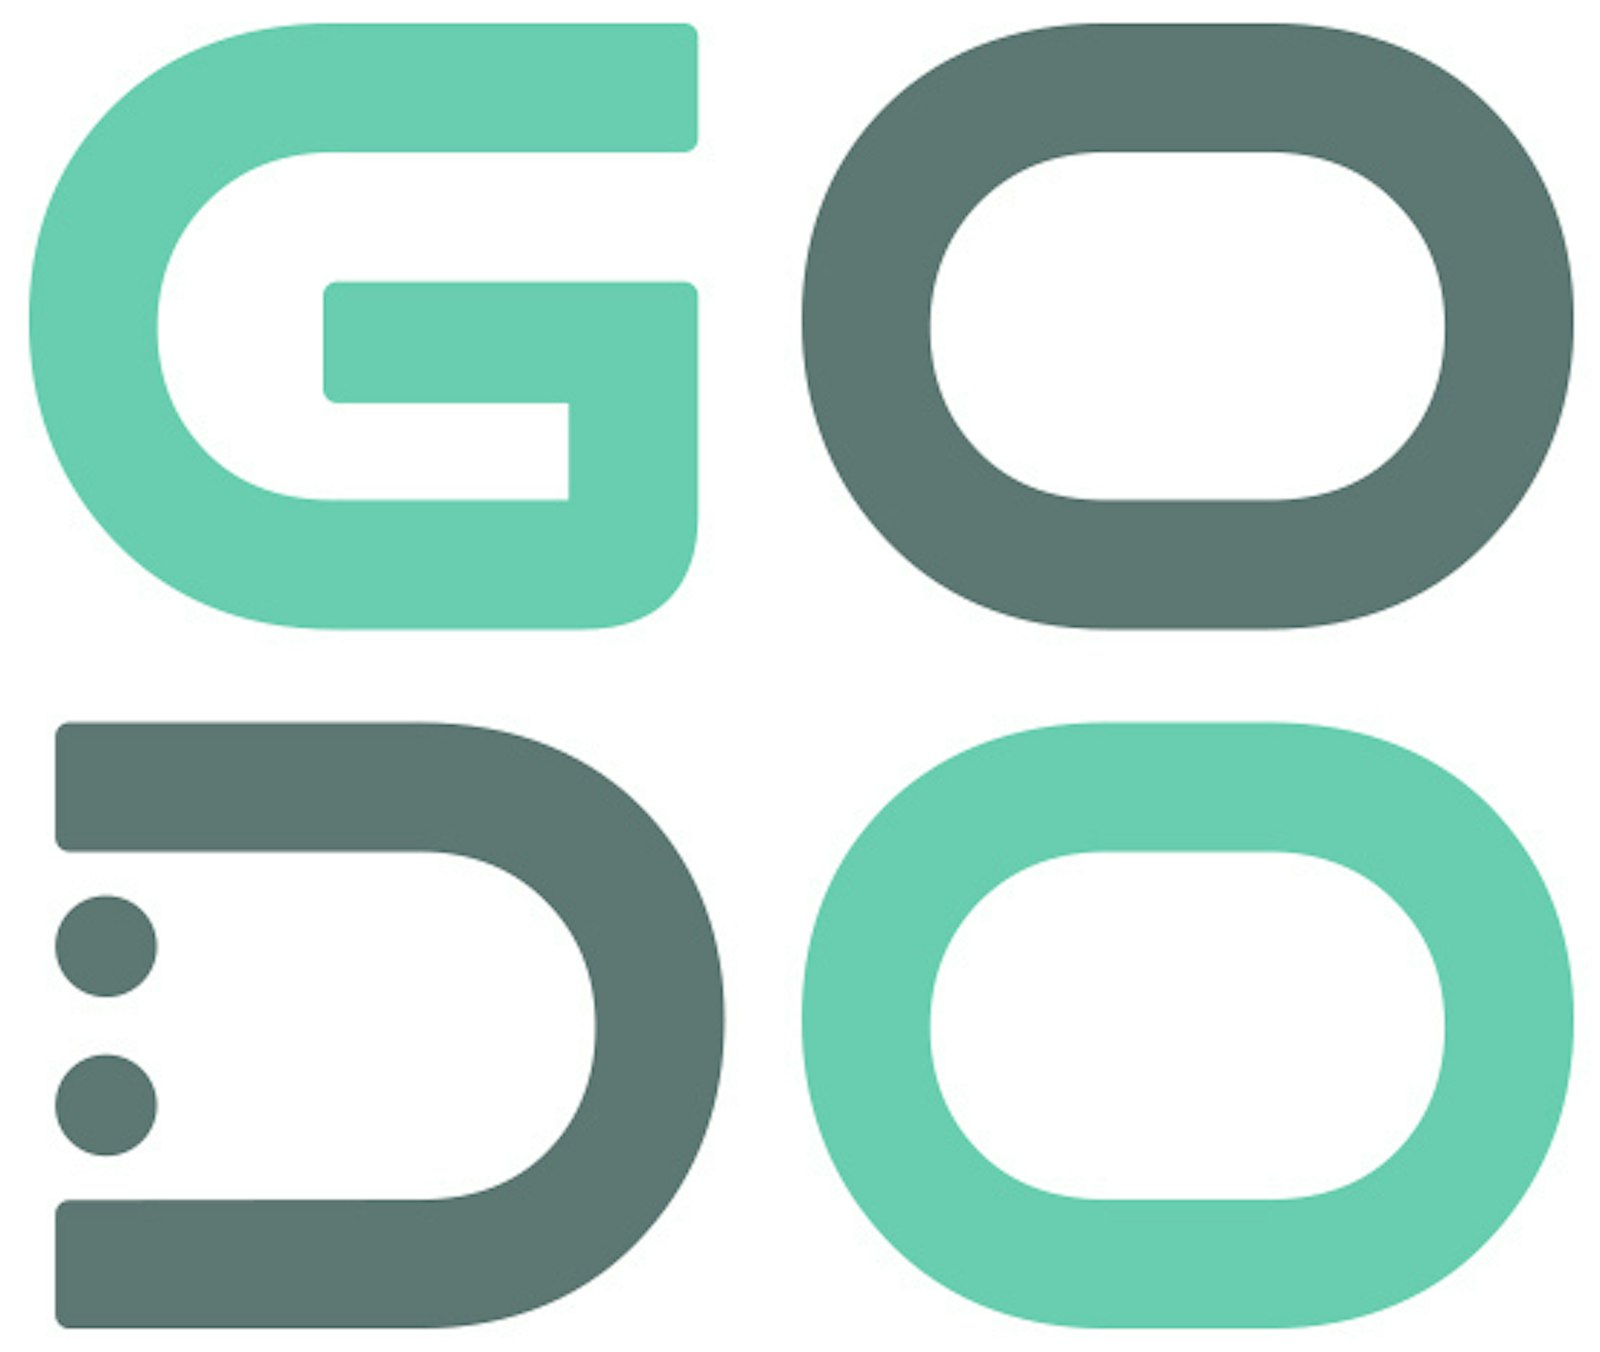 The GoDo logo design in color on a white background.